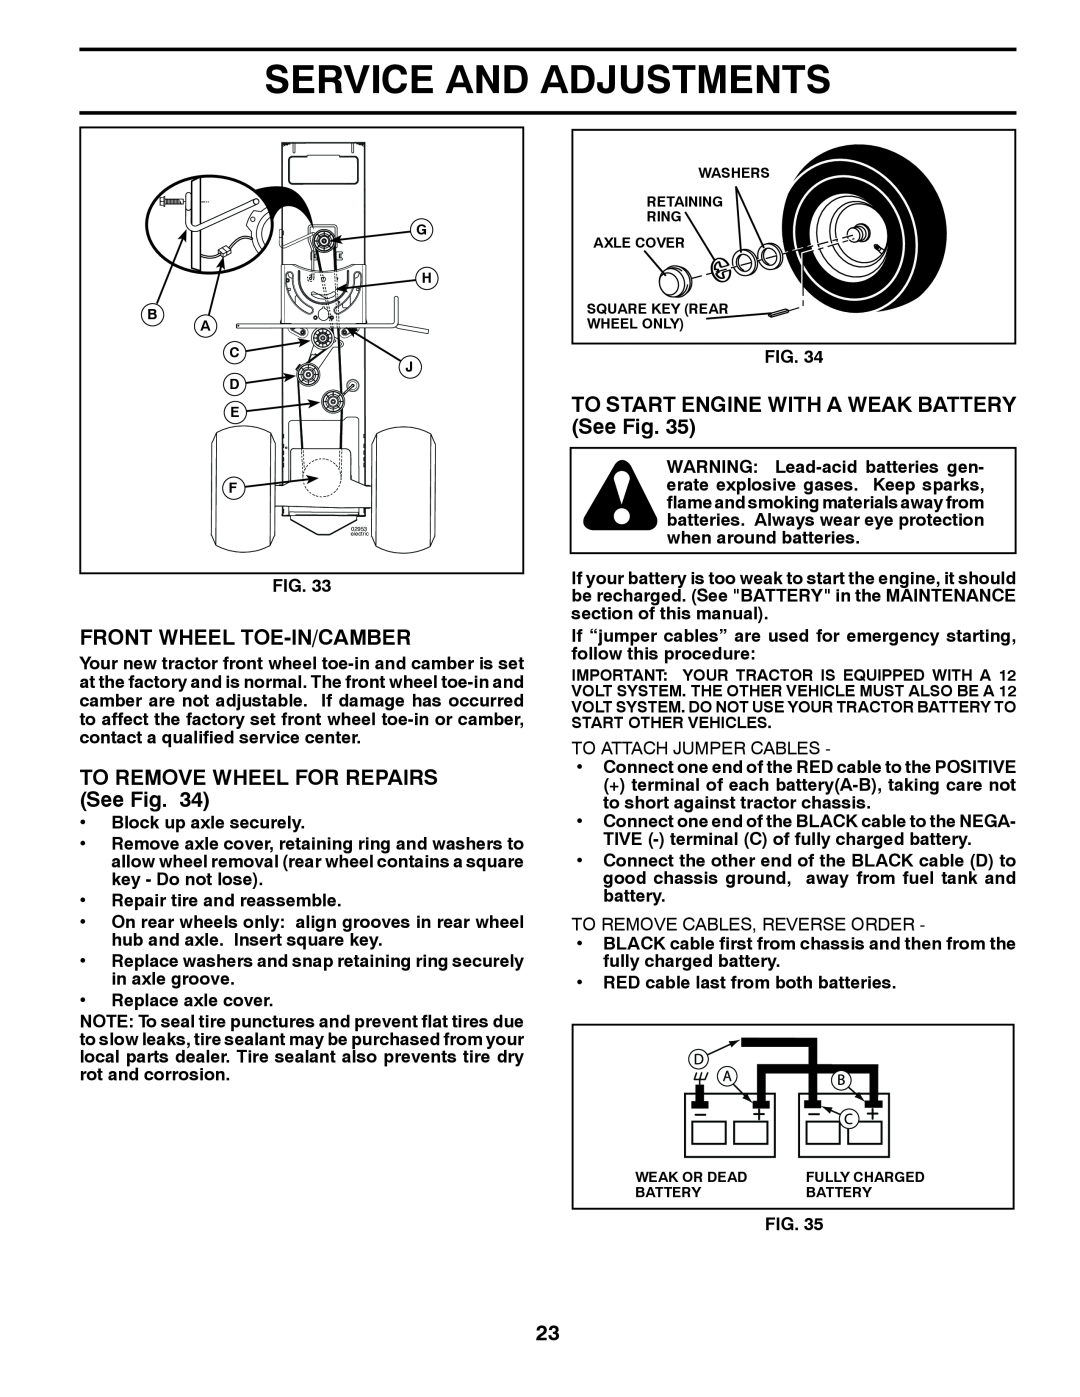 Poulan 417920 Front Wheel Toe-In/Camber, TO REMOVE WHEEL FOR REPAIRS See Fig, TO START ENGINE WITH A WEAK BATTERY See Fig 